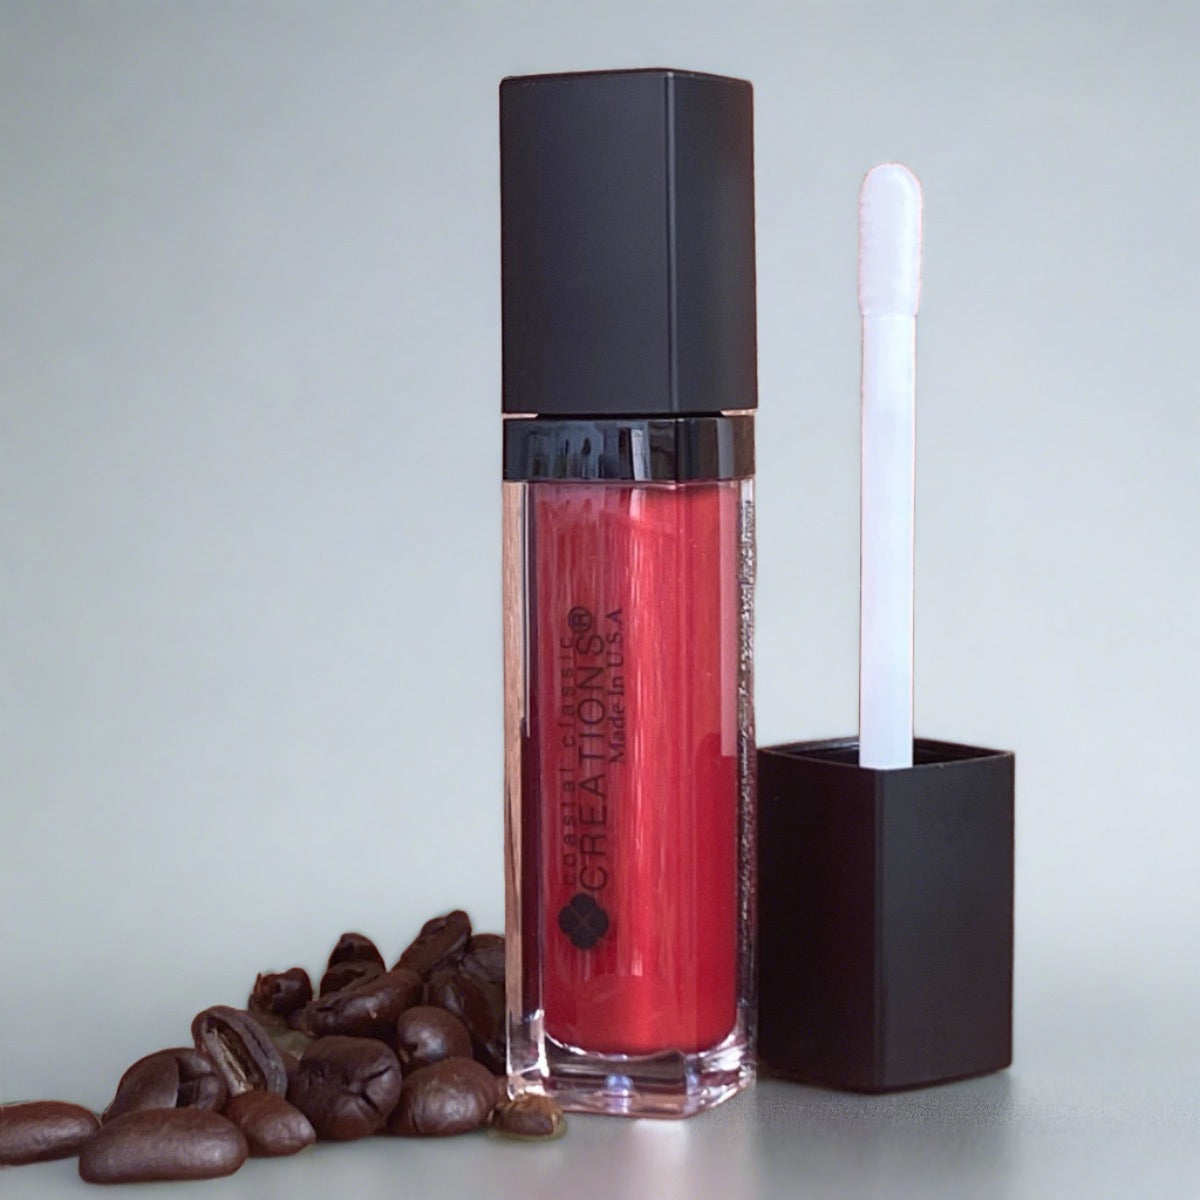 Cherry Coco Red Hemp Lip Gloss  made with natural and organic ingredients